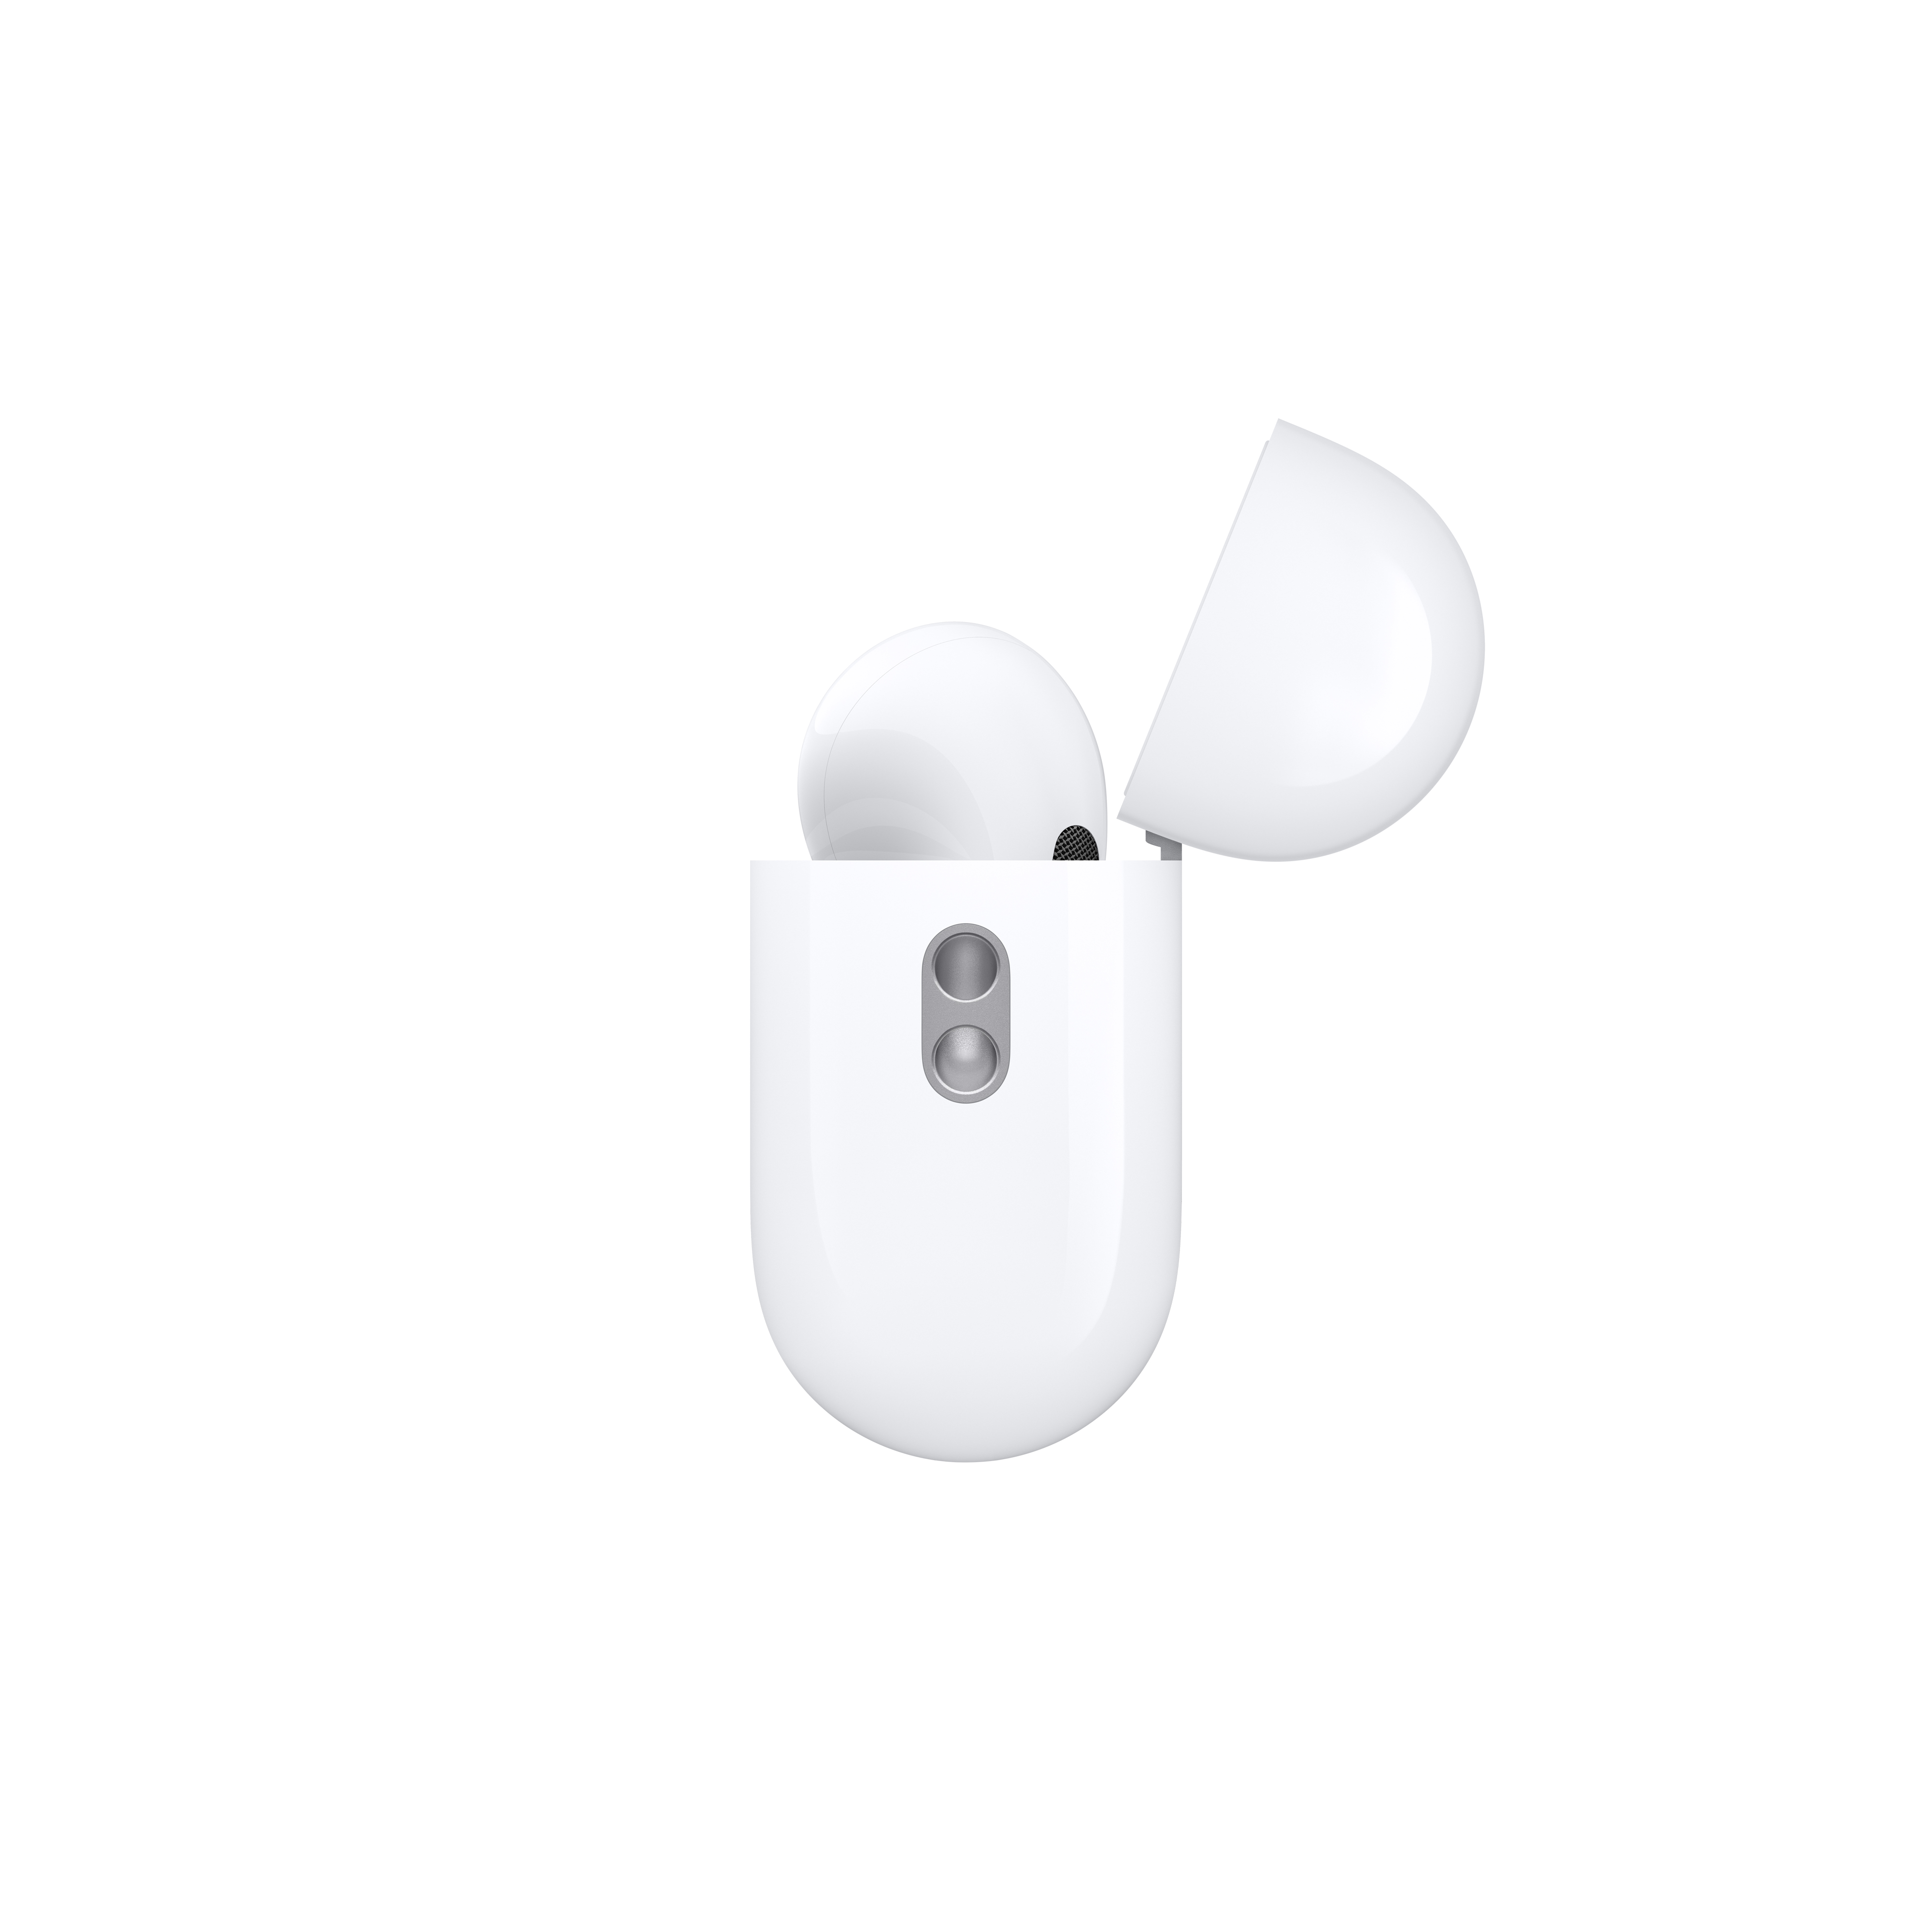 SEA_AirPods_Pro_2nd_Gen_PDP_Image_Position-4.jpg